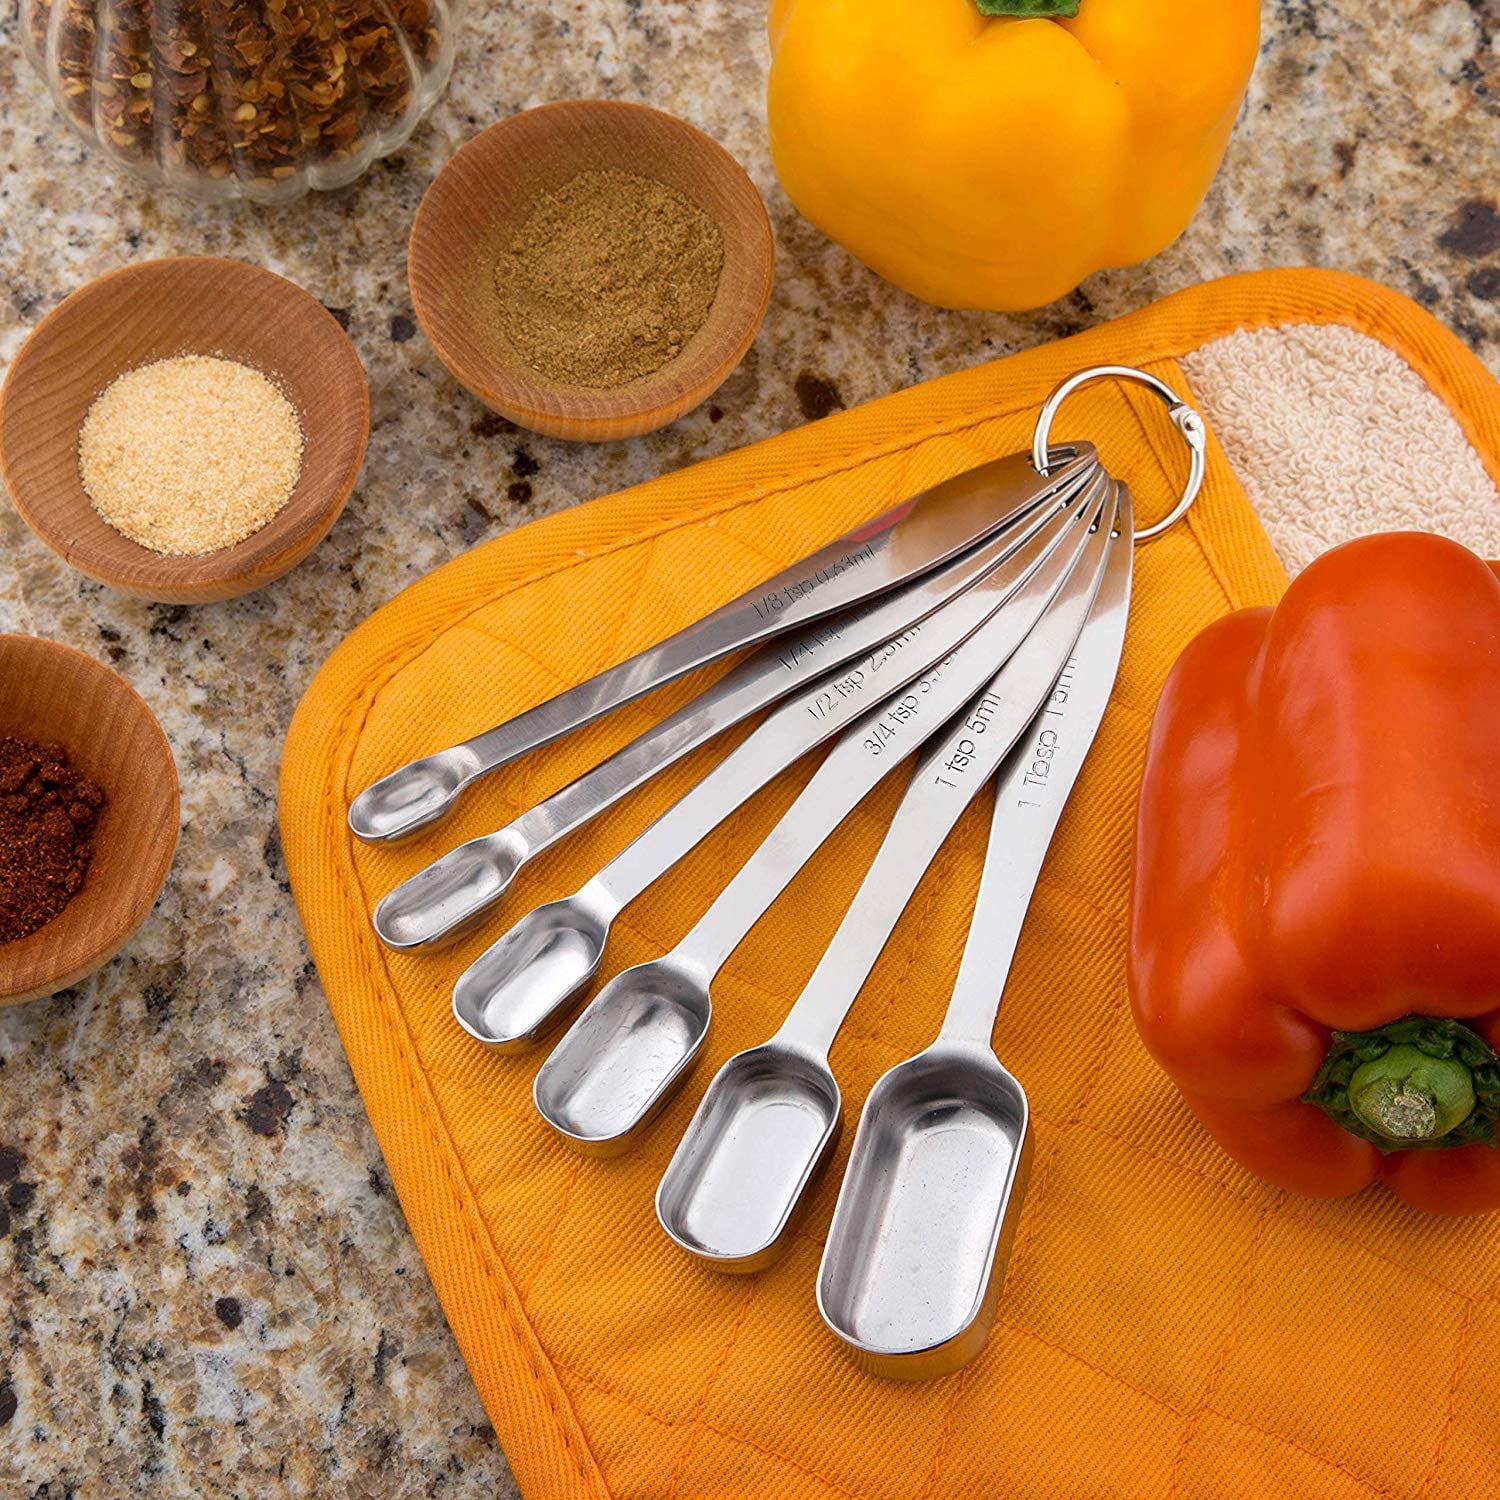 Last Confection Stainless Steel Measuring Spoons, Set of 6 for Dry Spices  and Liquid Cooking & Baking Ingredients